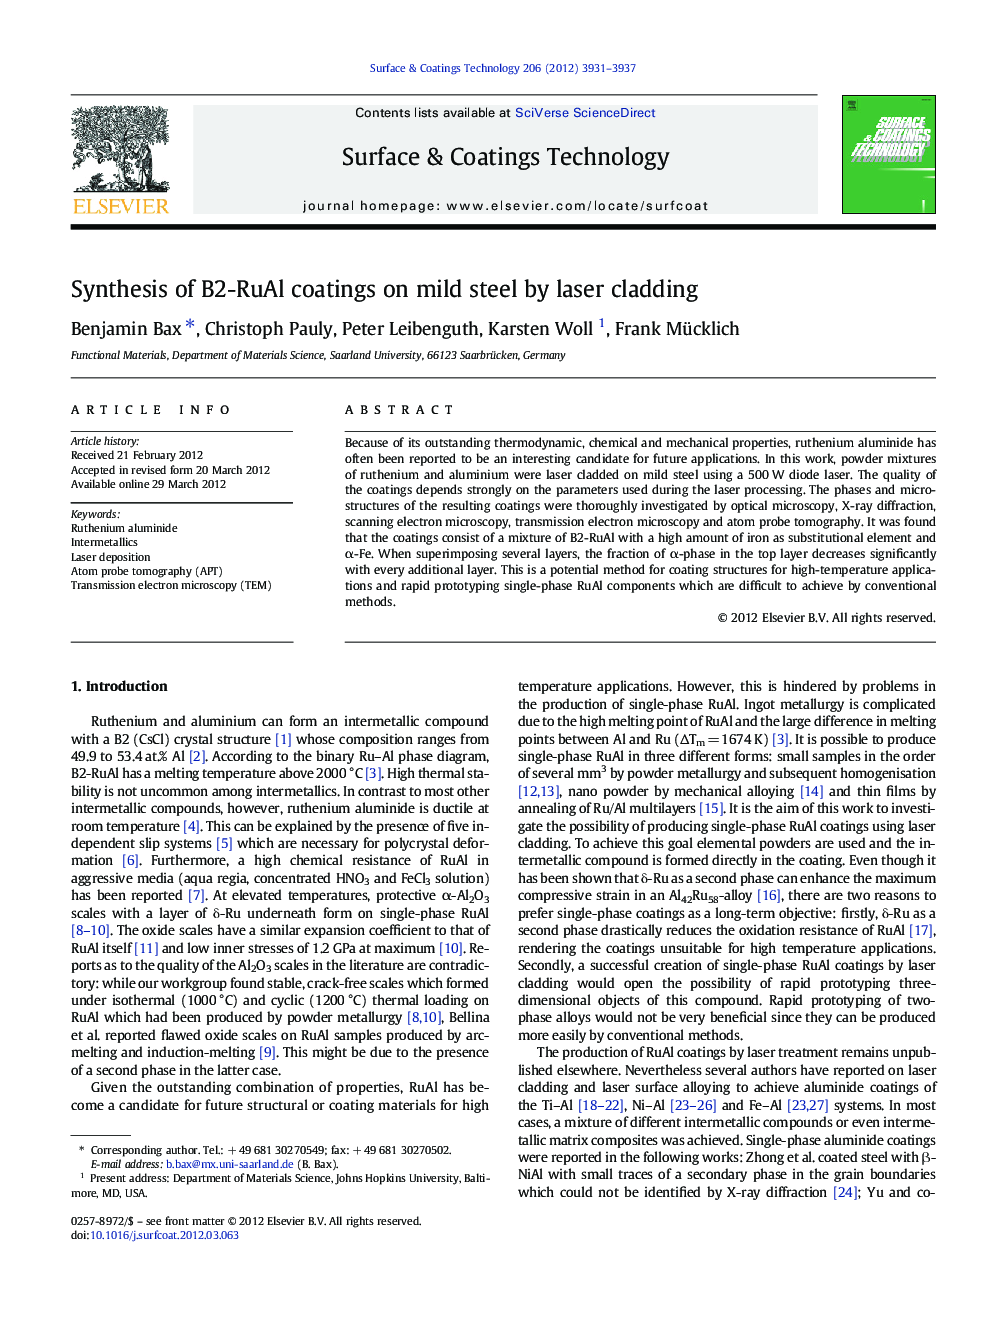 Synthesis of B2-RuAl coatings on mild steel by laser cladding